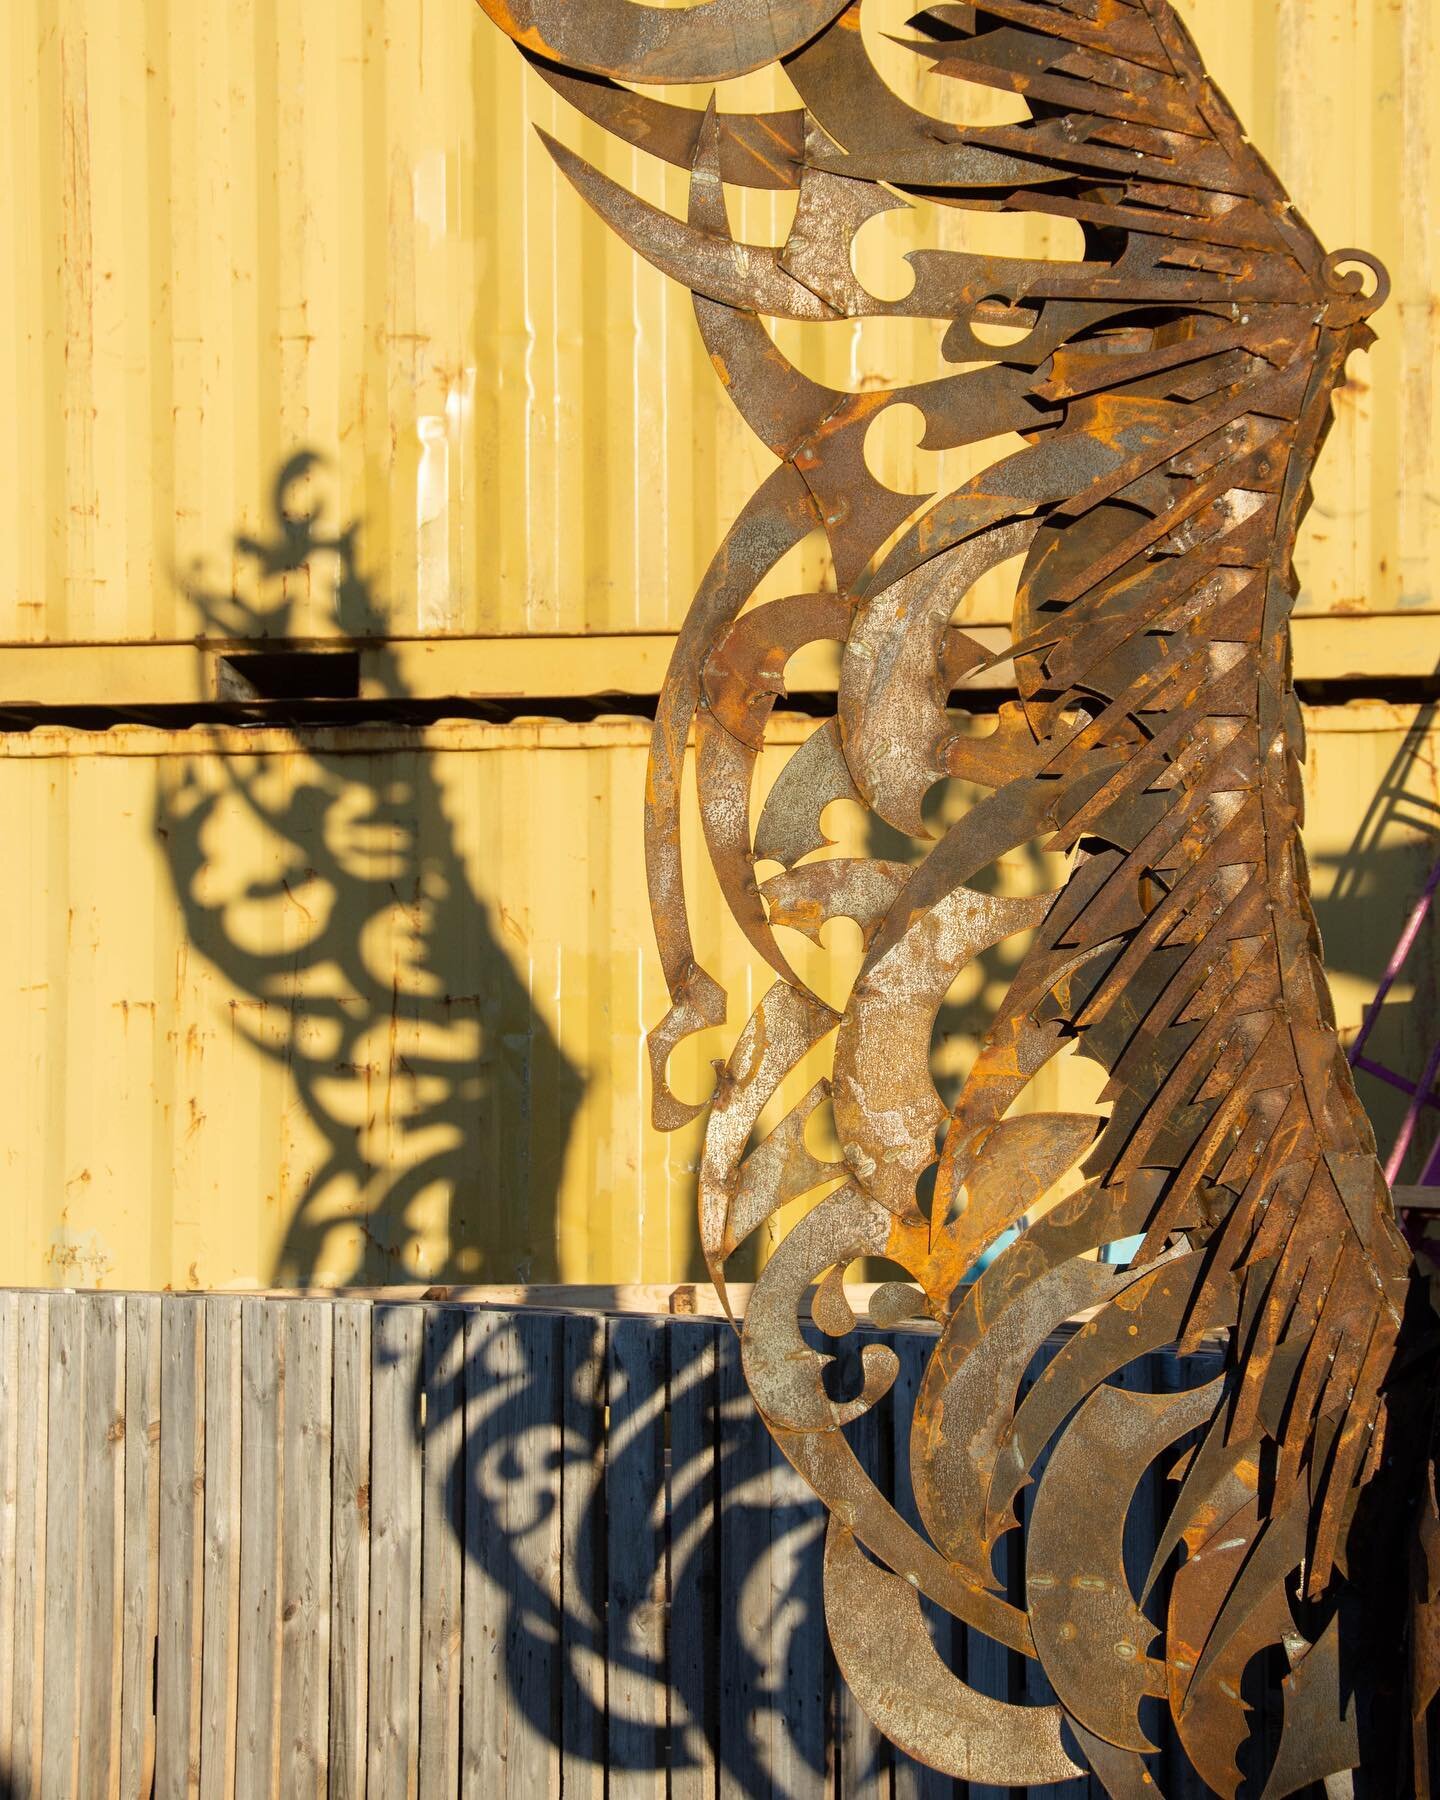 Wings of the phoenix create a lovely shadow against the container backdrop of #Frihamnstorget. This part is constructed from @annielocke s art nouveau balcony cutoffs which gave it a lovely feather affect 🌟 
.
.
.
#welding #art #publicart #phoenix #